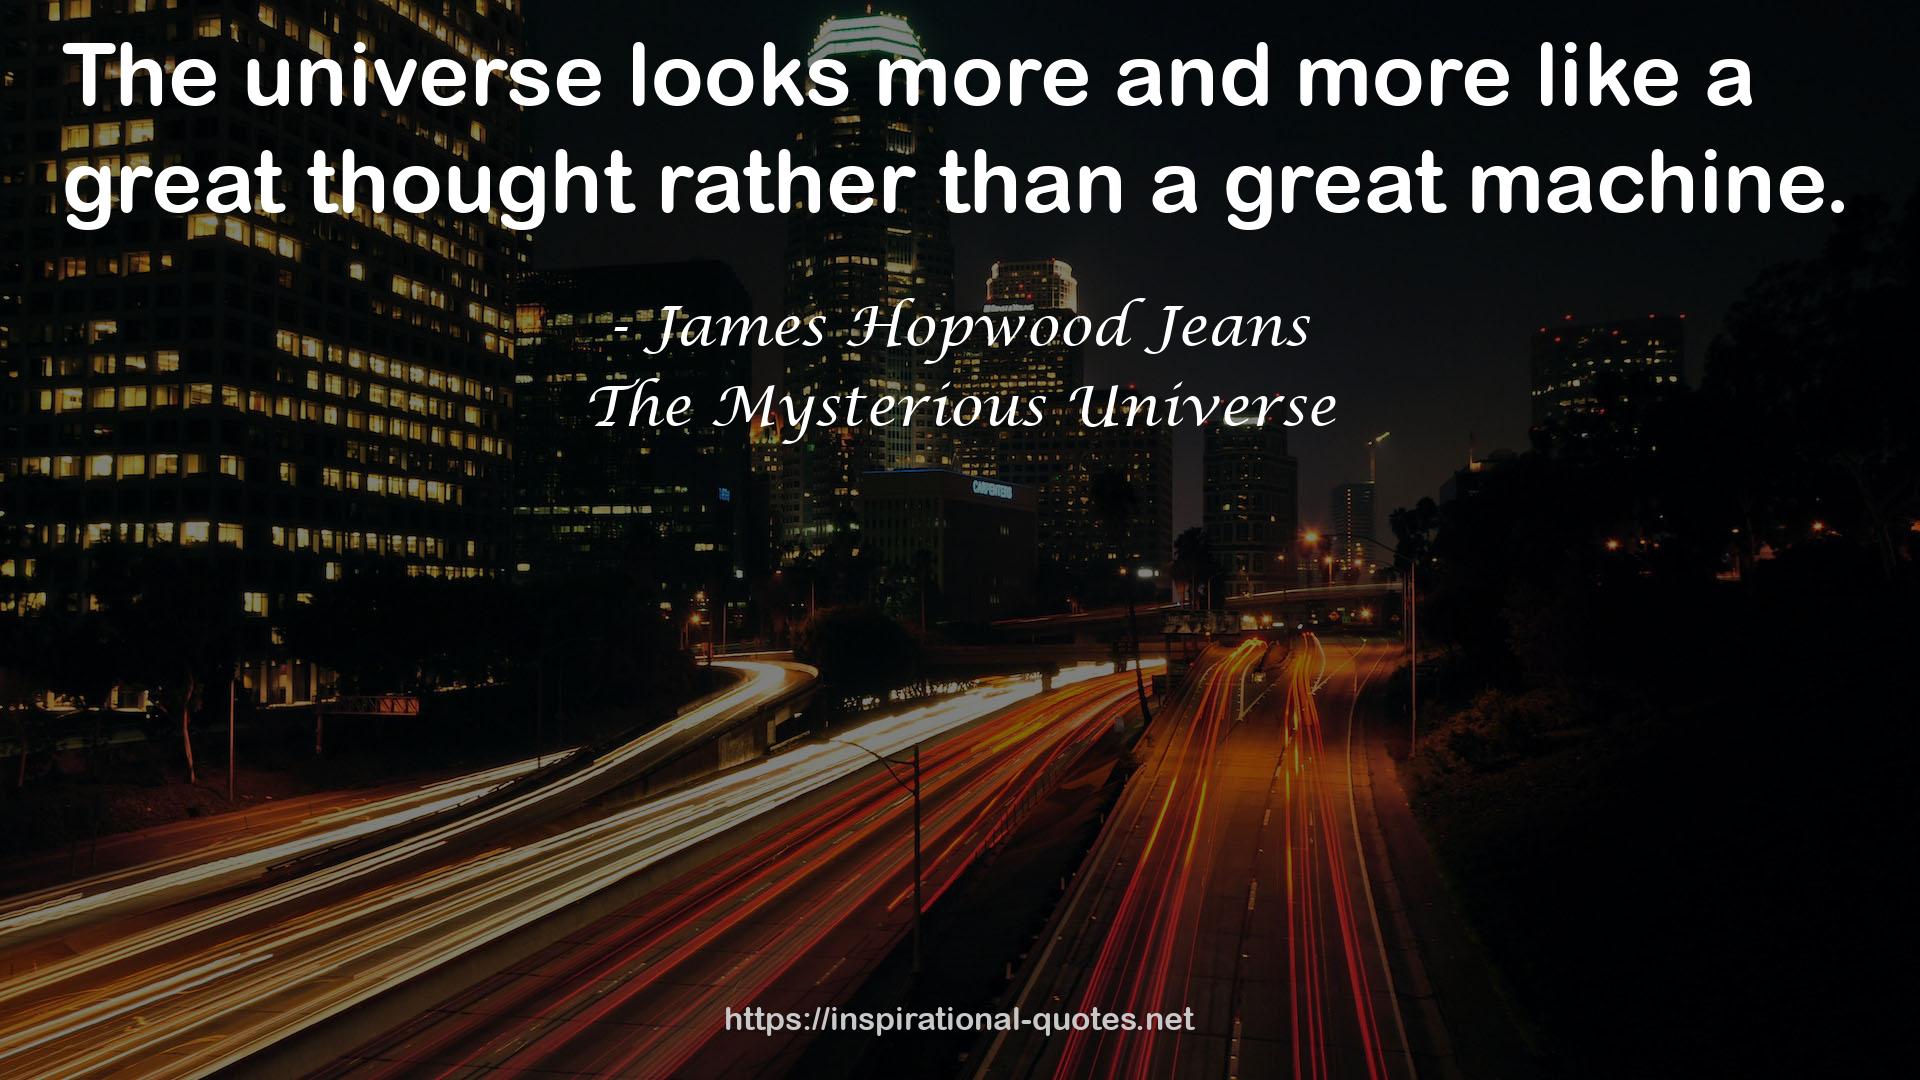 The Mysterious Universe QUOTES